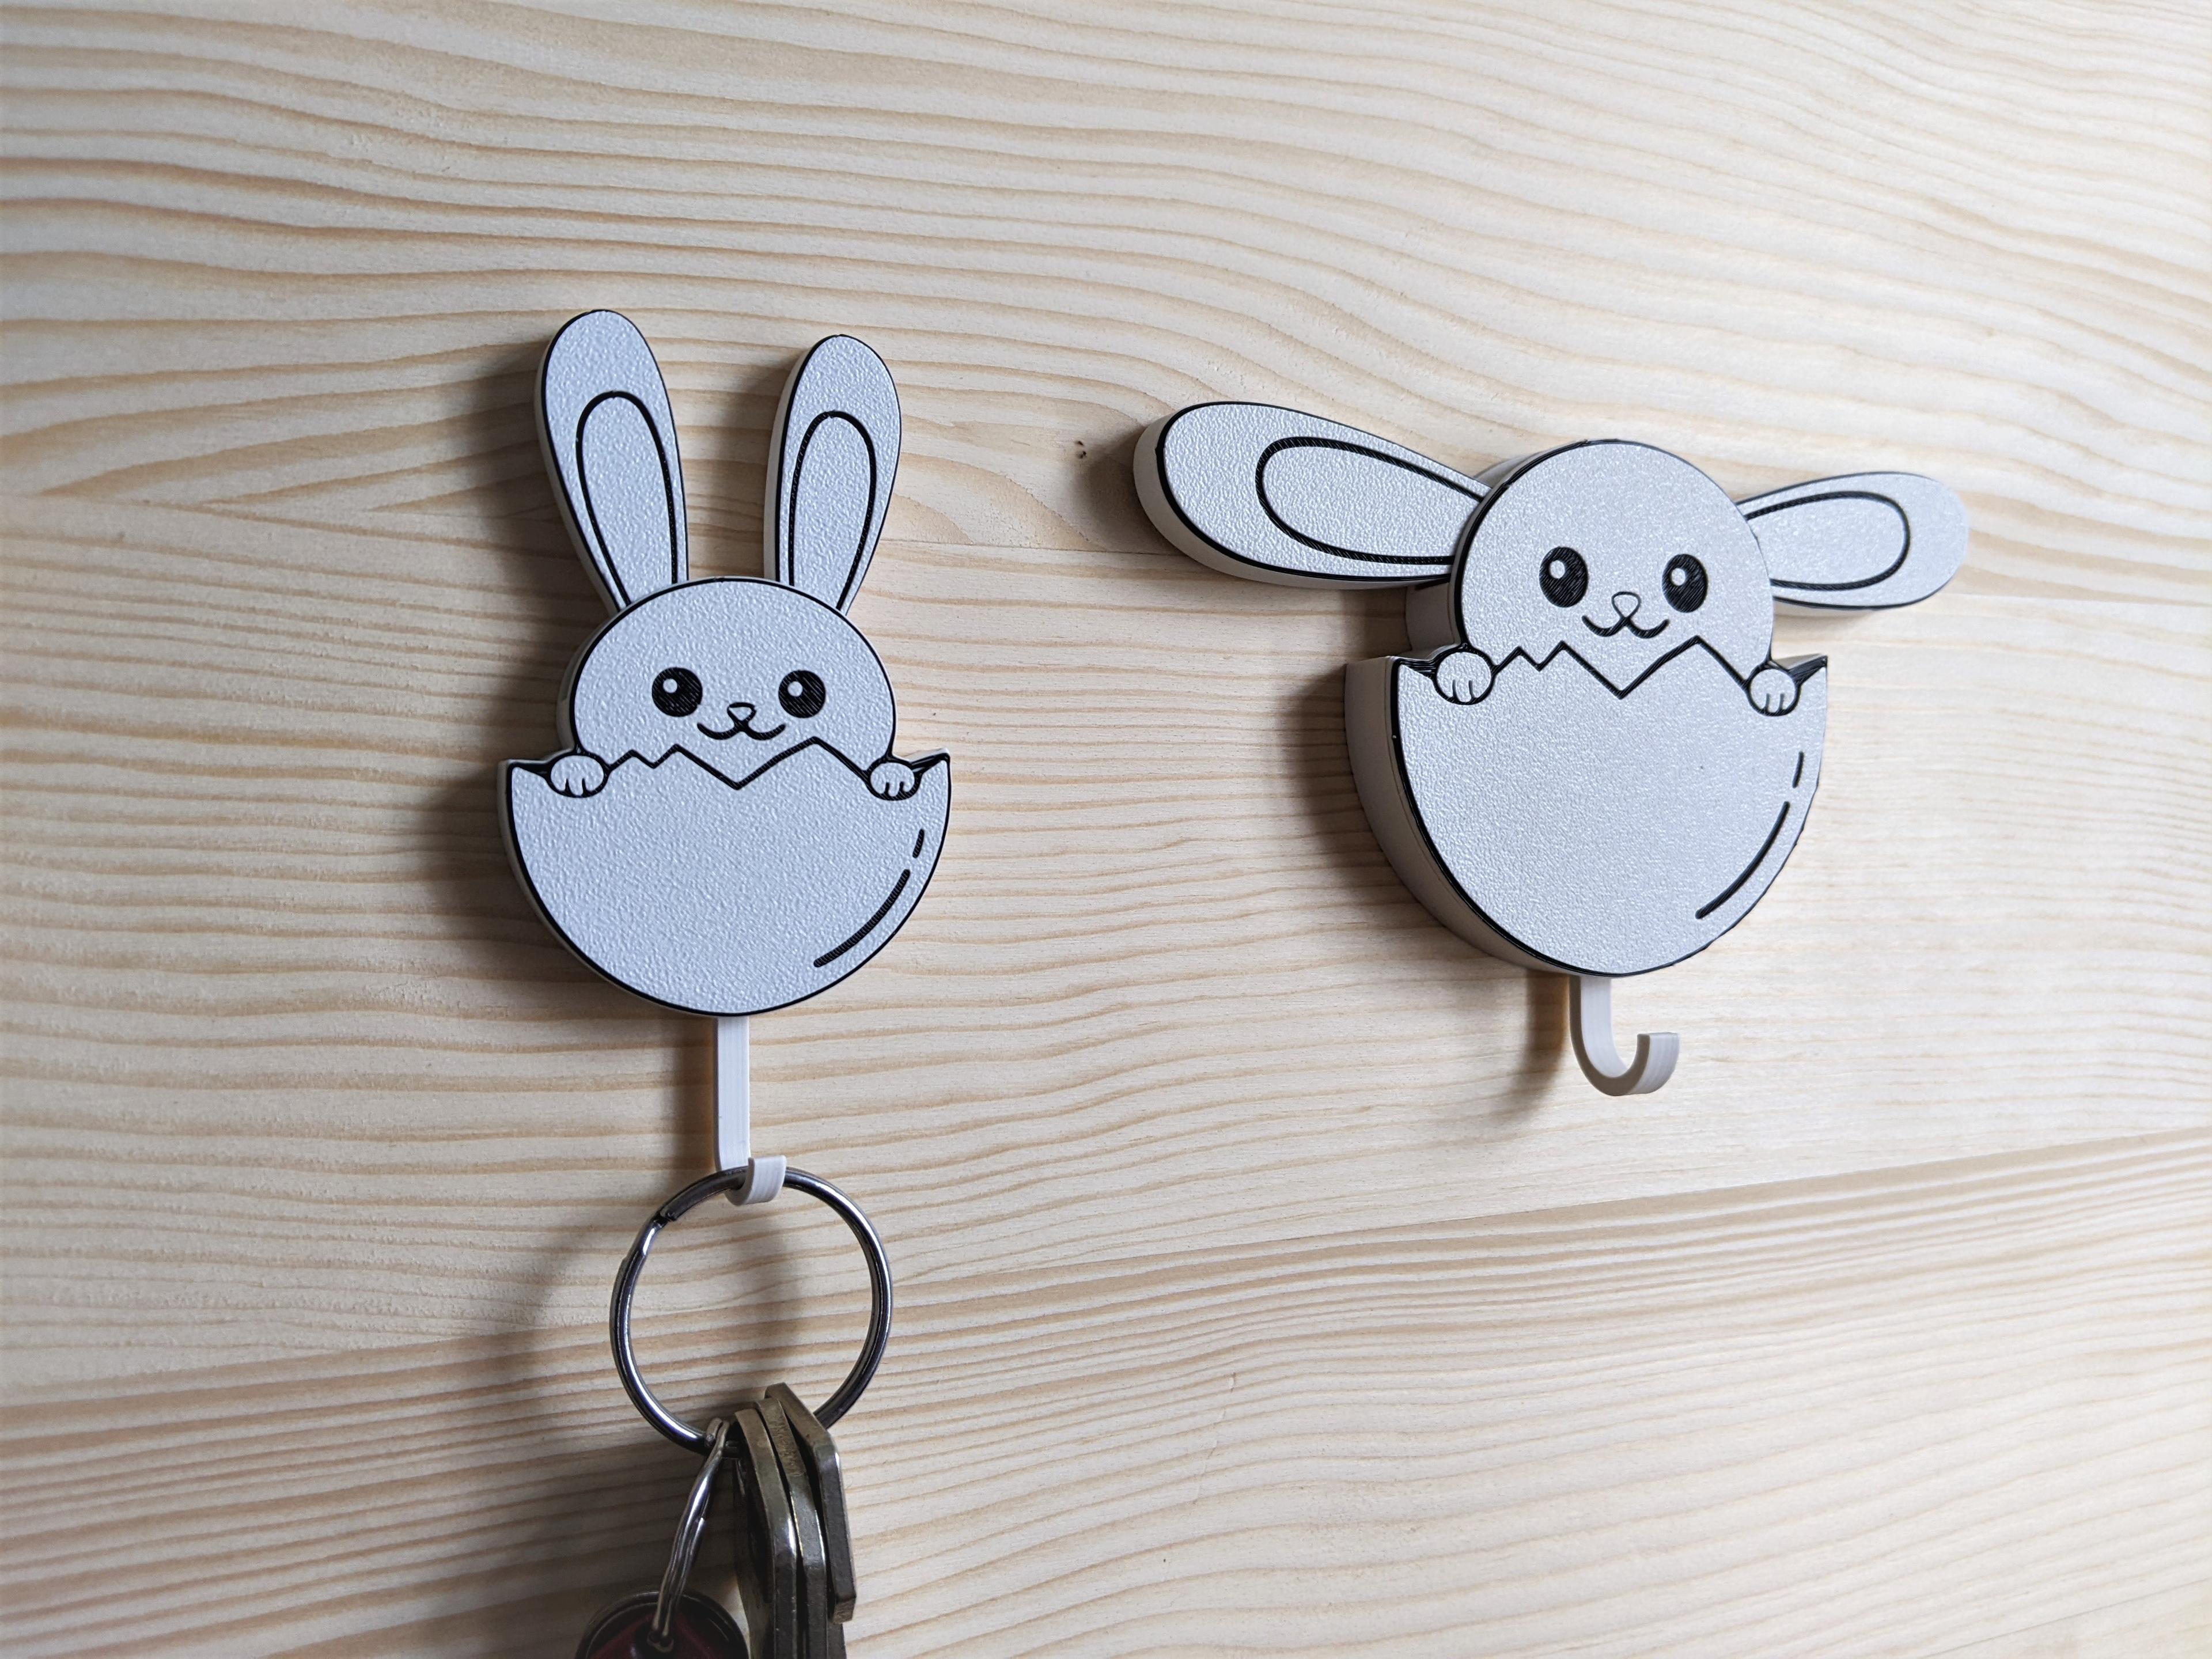 WALL KEY HOLDER BUNNY - funny and cute bunny key hanger and organizer 3d model